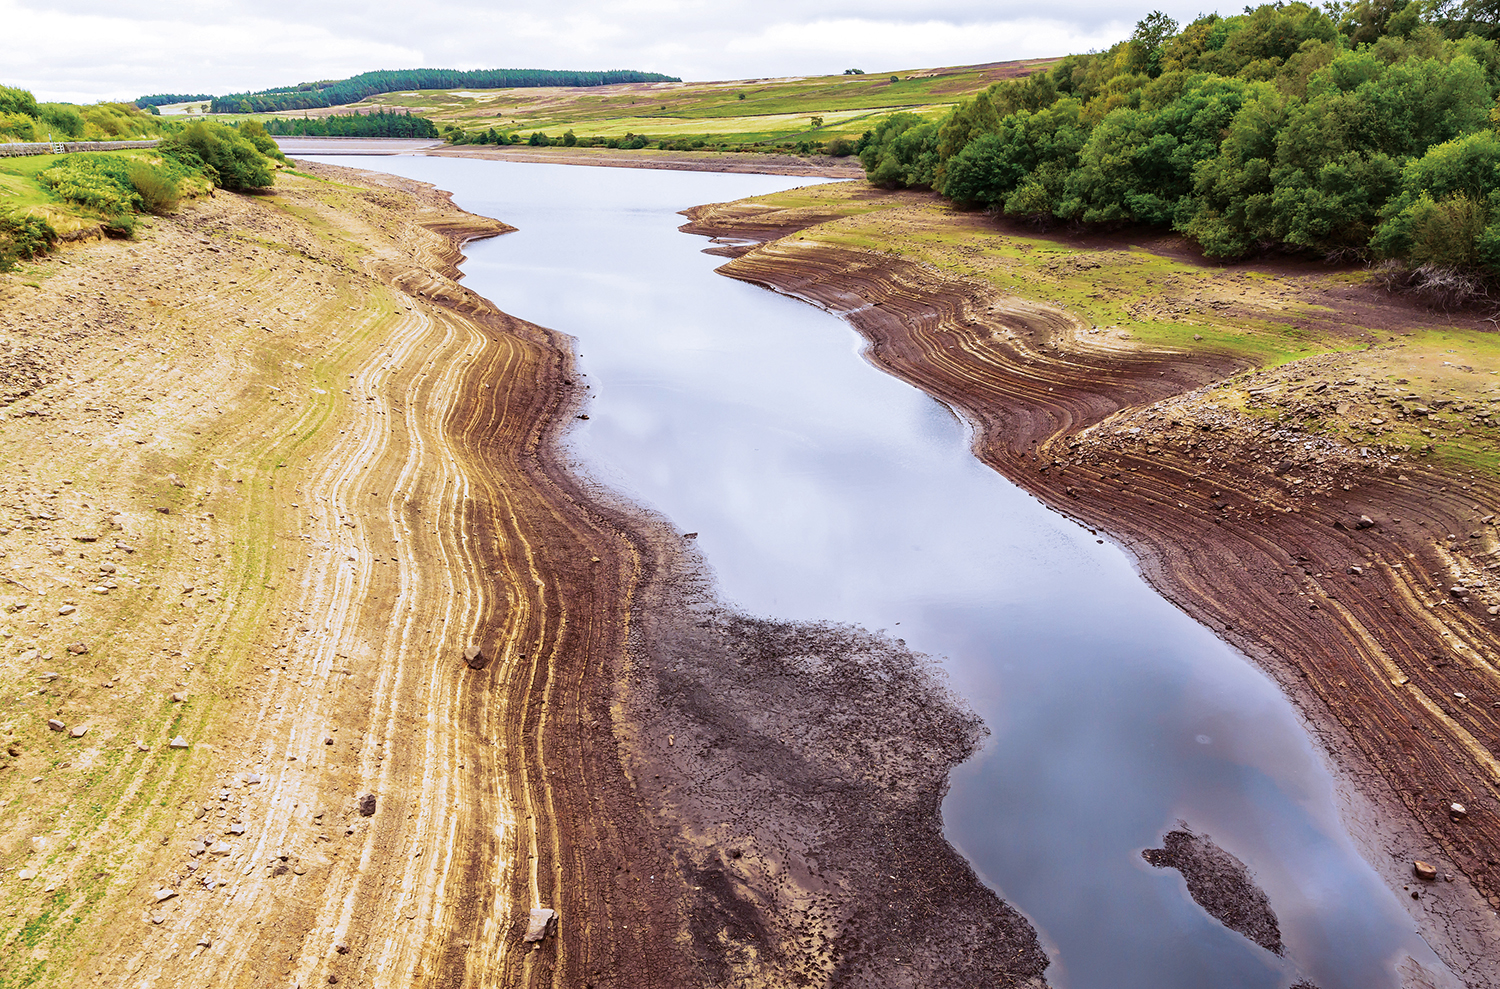 The climate emergency is impacting rivers in the UK